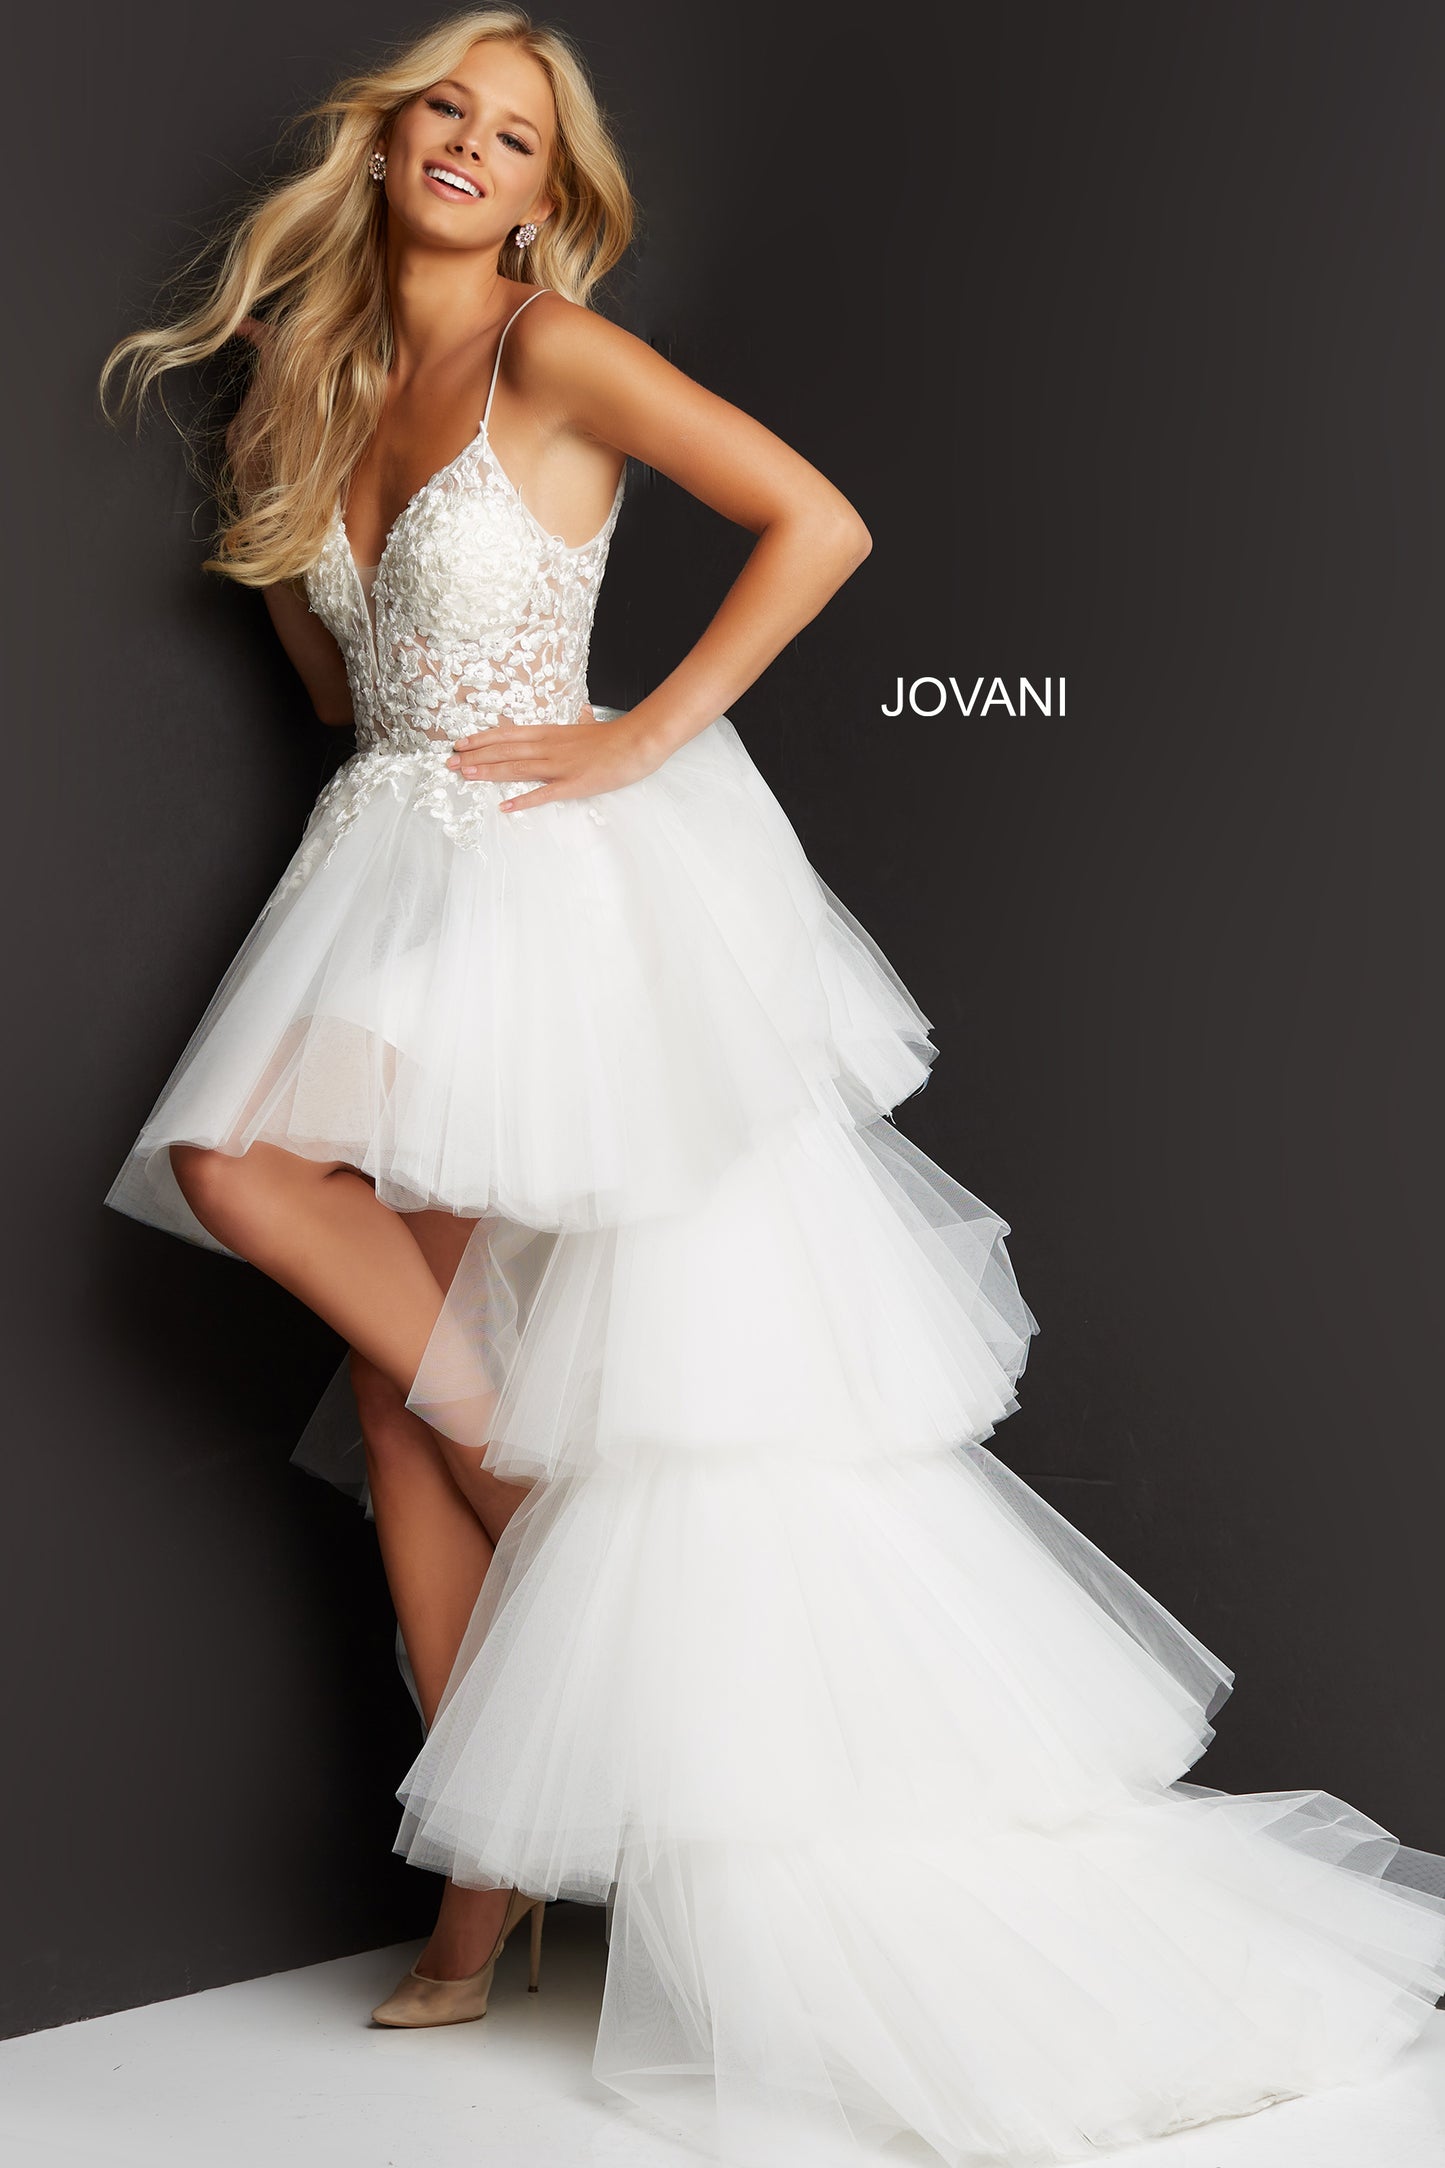 Jovani 07263 High Low Prom Dress Embroidered Floral Bodice Pleated Train  Layered Ruffle Lace Sheer